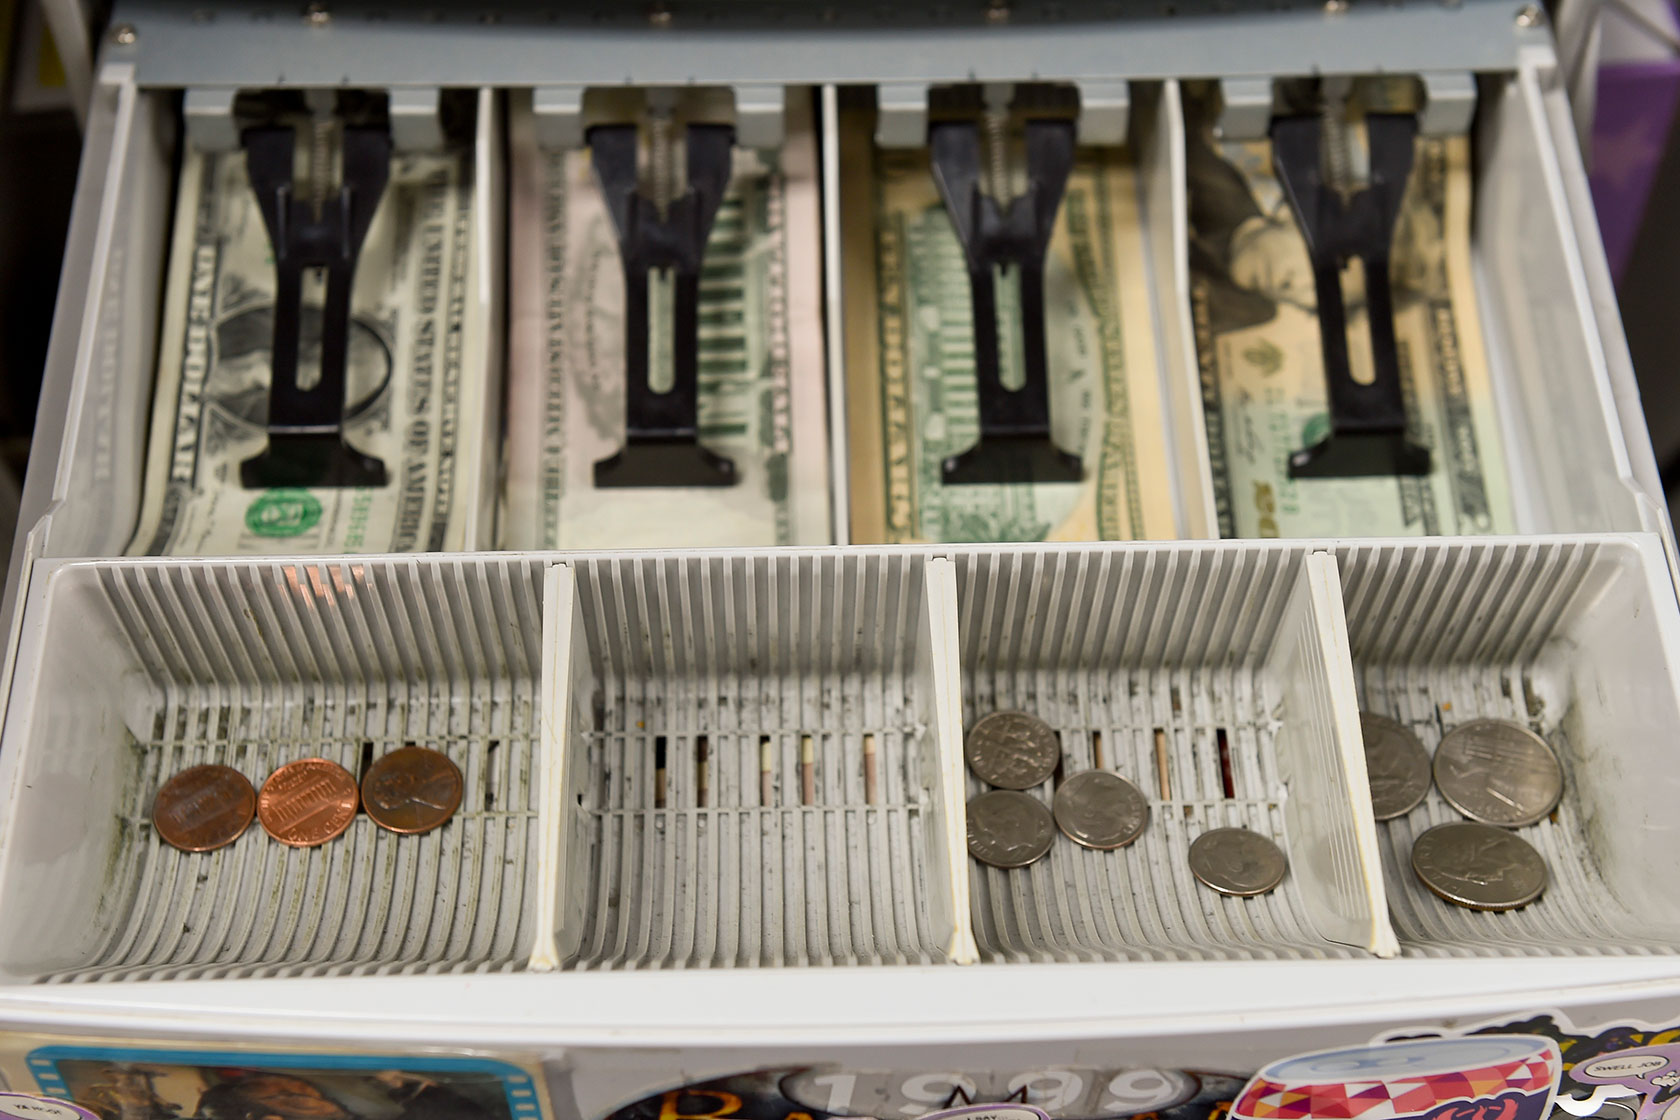 Photo shows an open change drawer with bills and coins